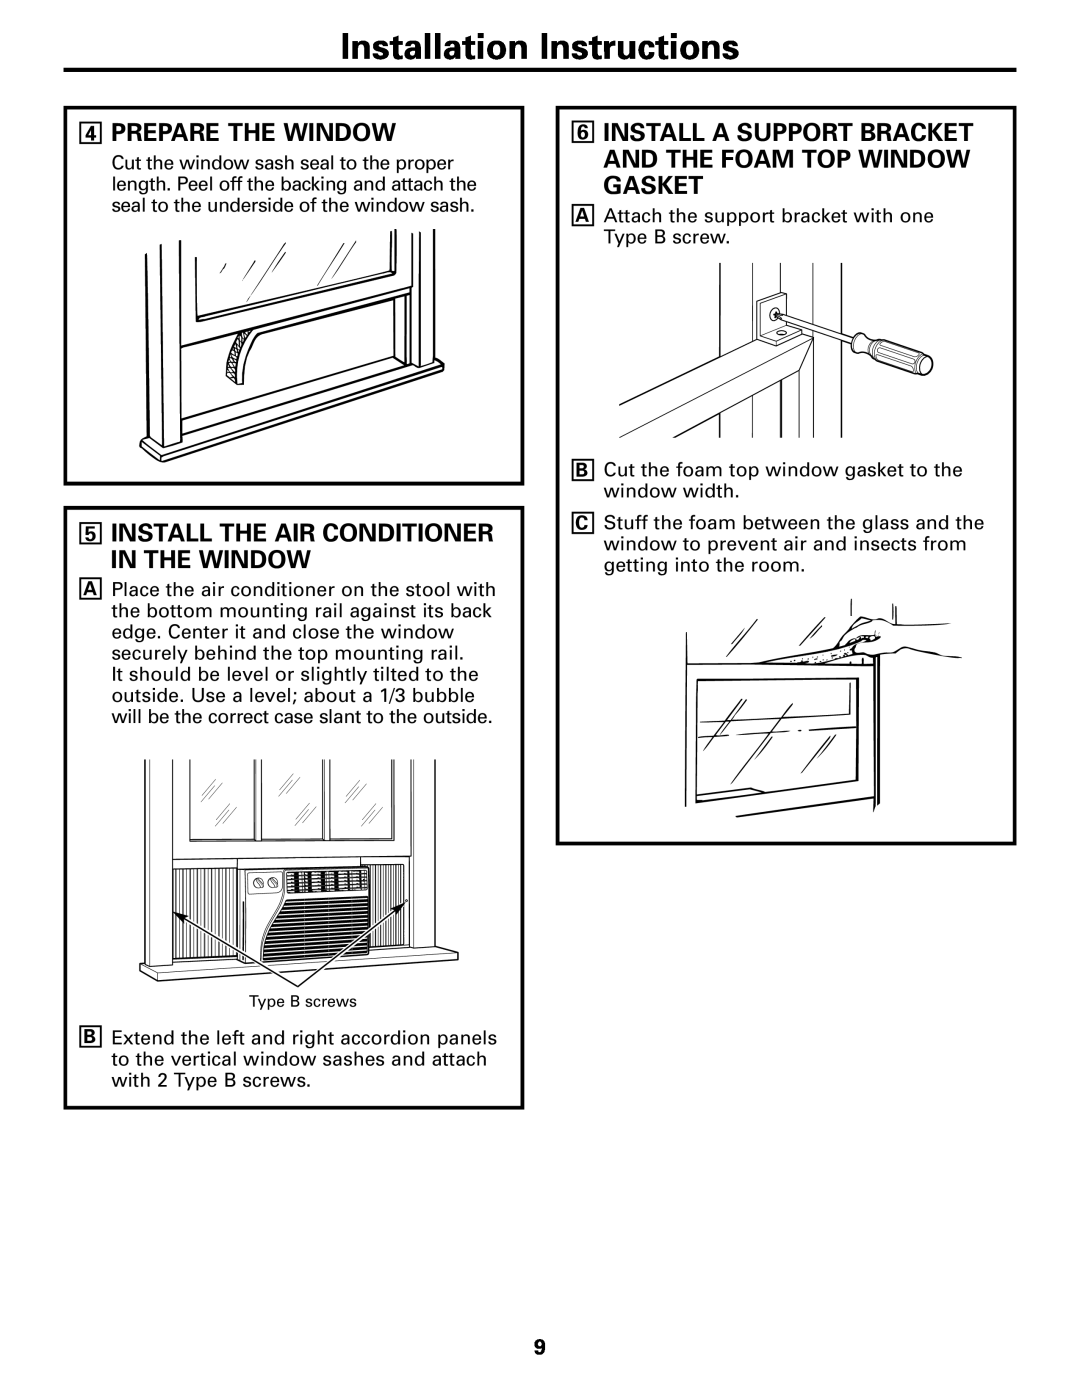 GE AER05 4PREPARE THE WINDOW, 5INSTALL THE AIR CONDITIONER IN THE WINDOW, Installation Instructions, A B C 